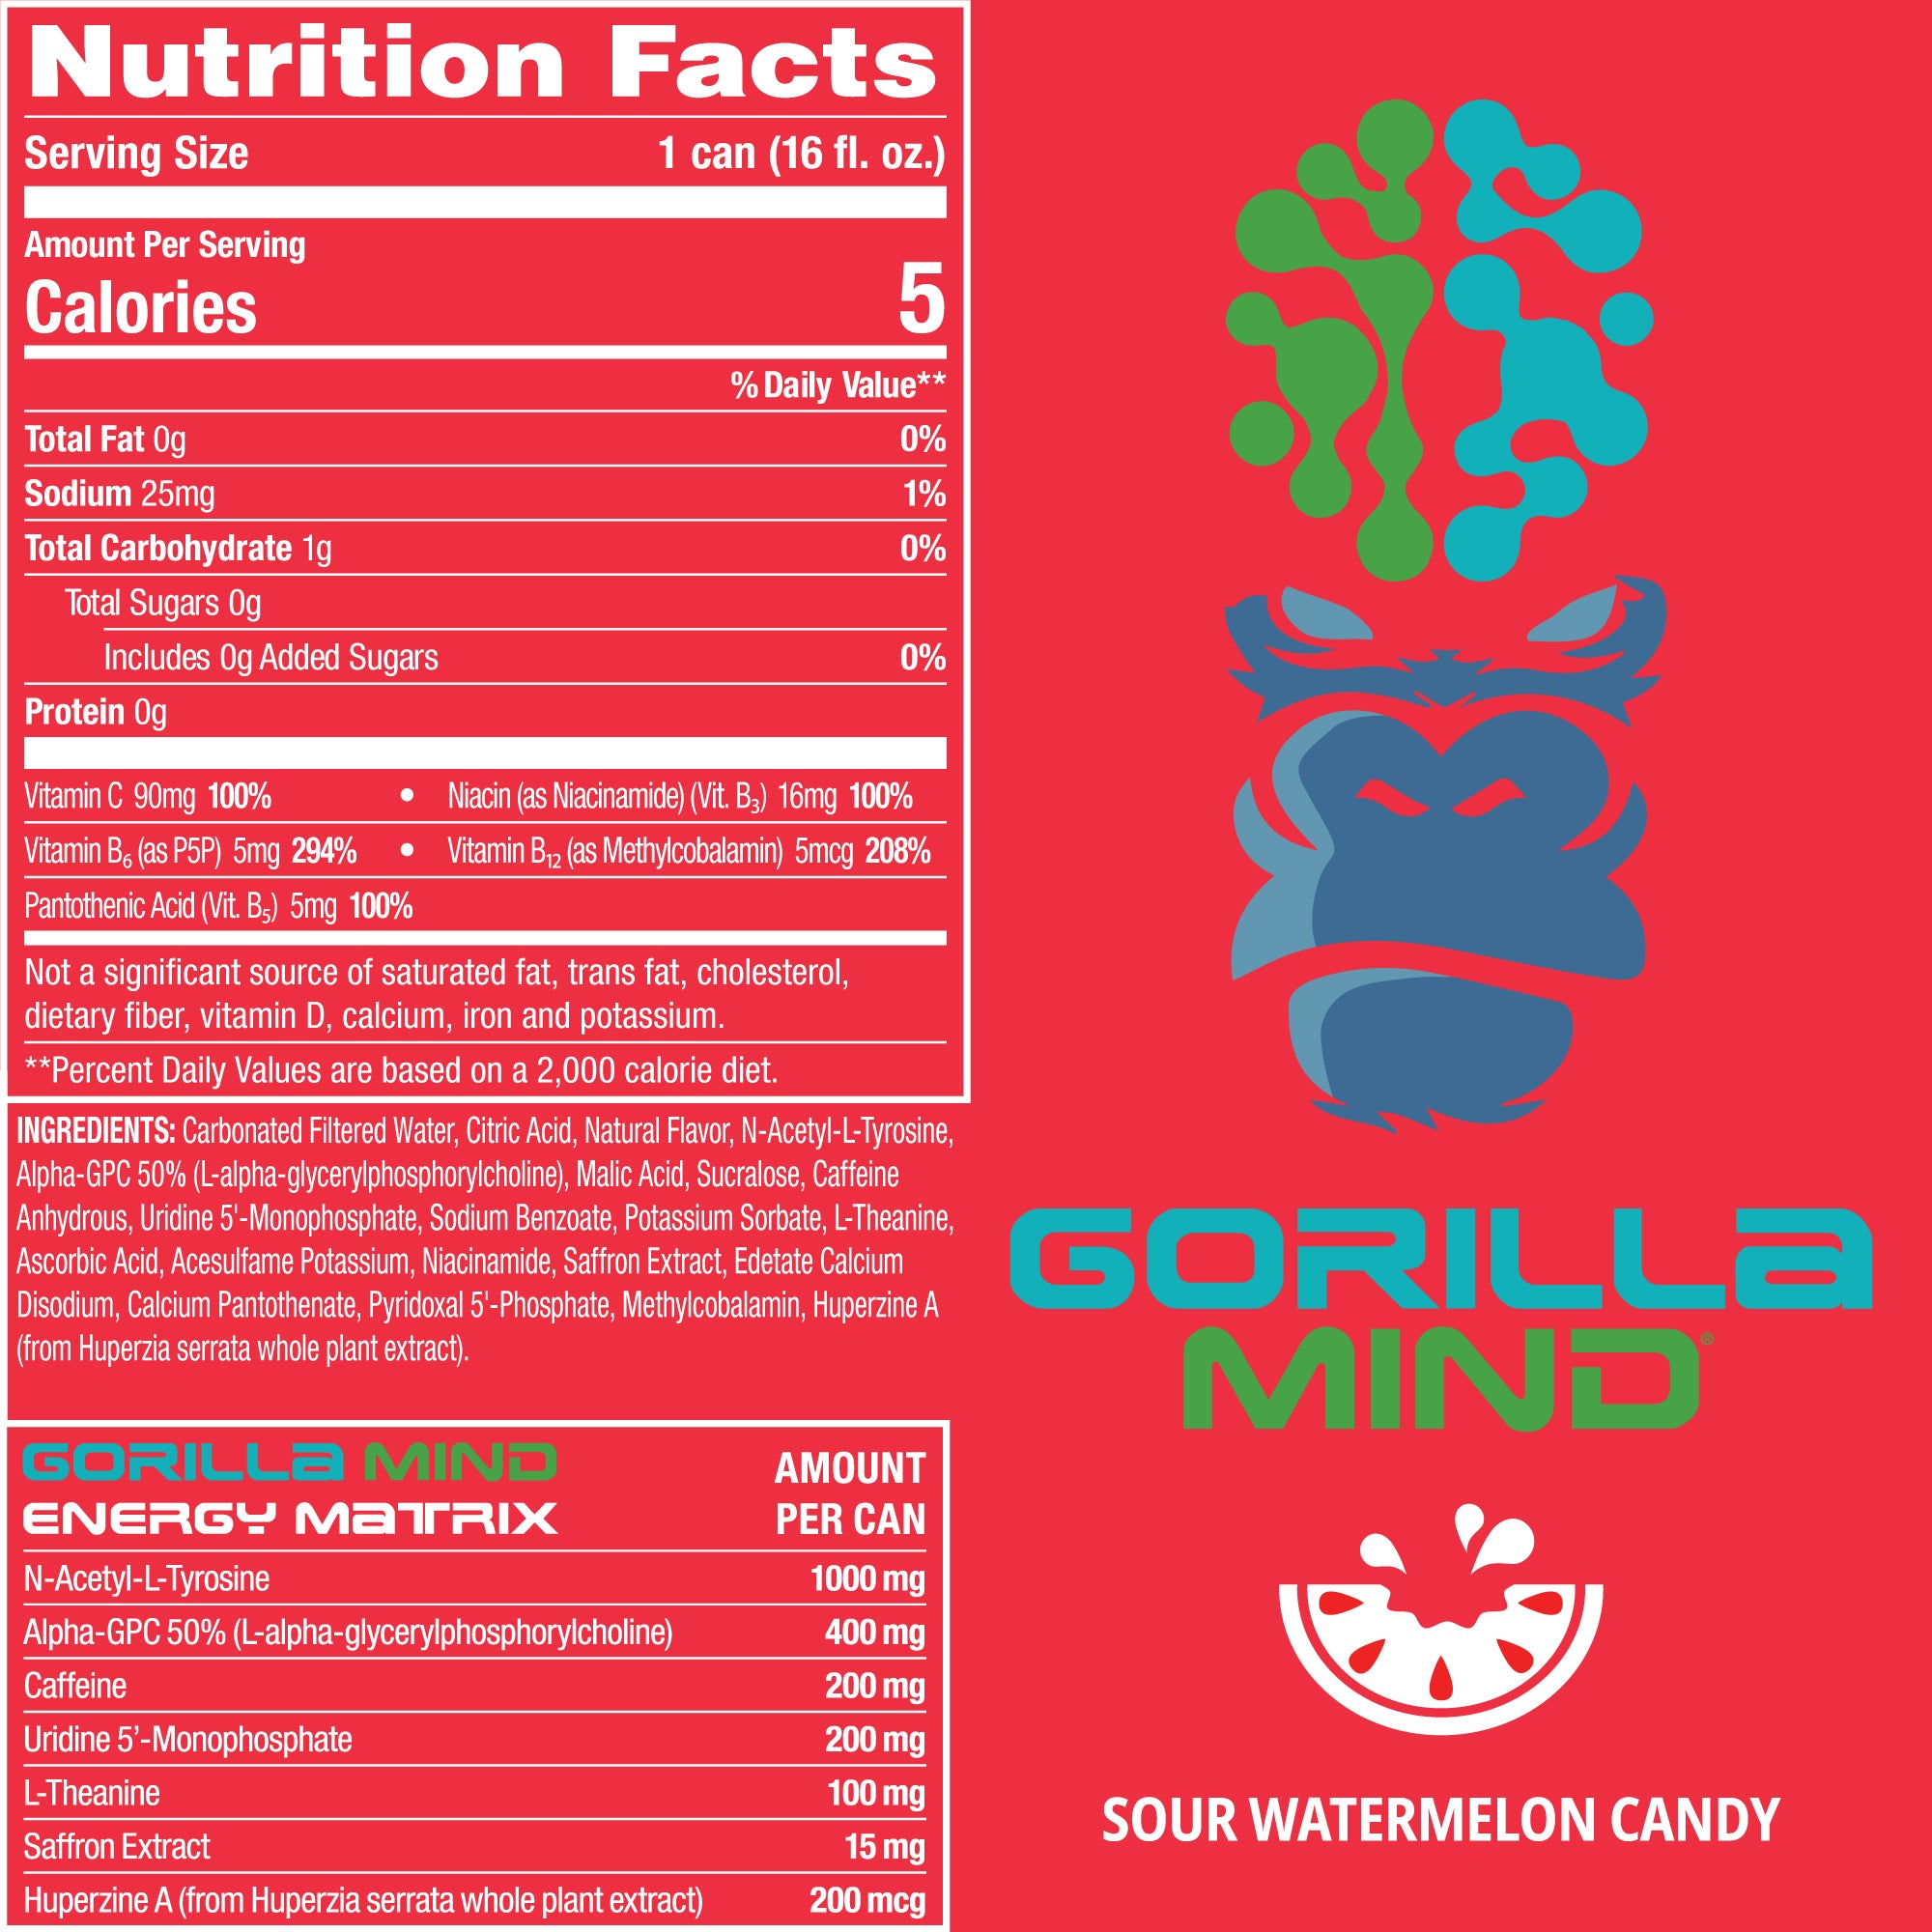 Sour Watermelon Candy Nutrition Facts